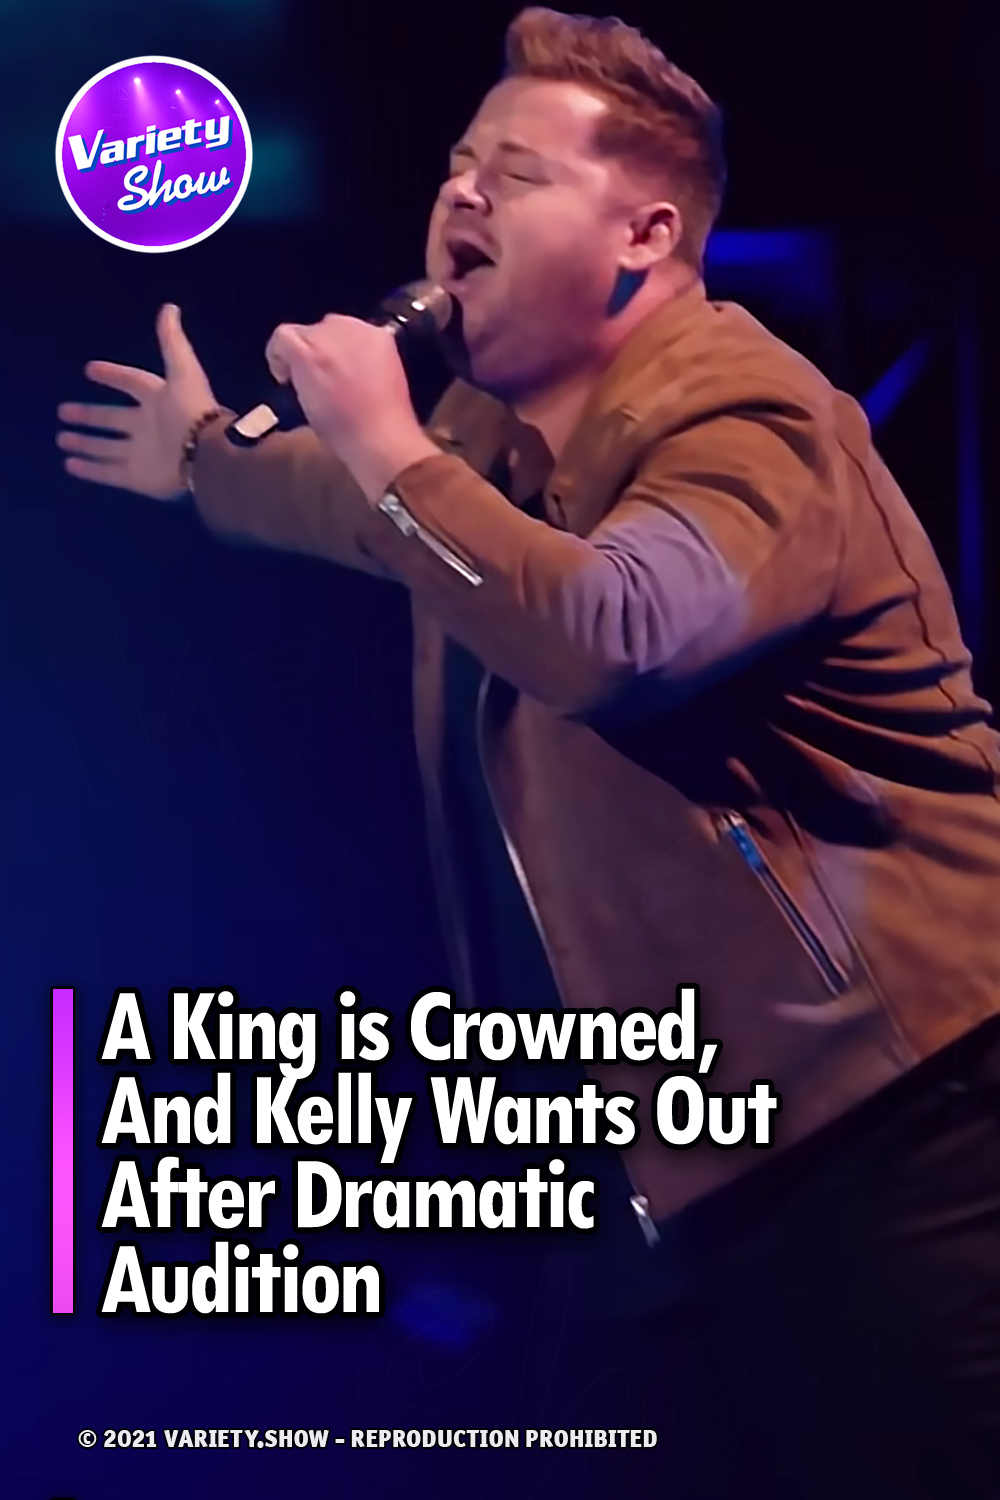 A King is Crowned, And Kelly Wants Out After Dramatic Audition